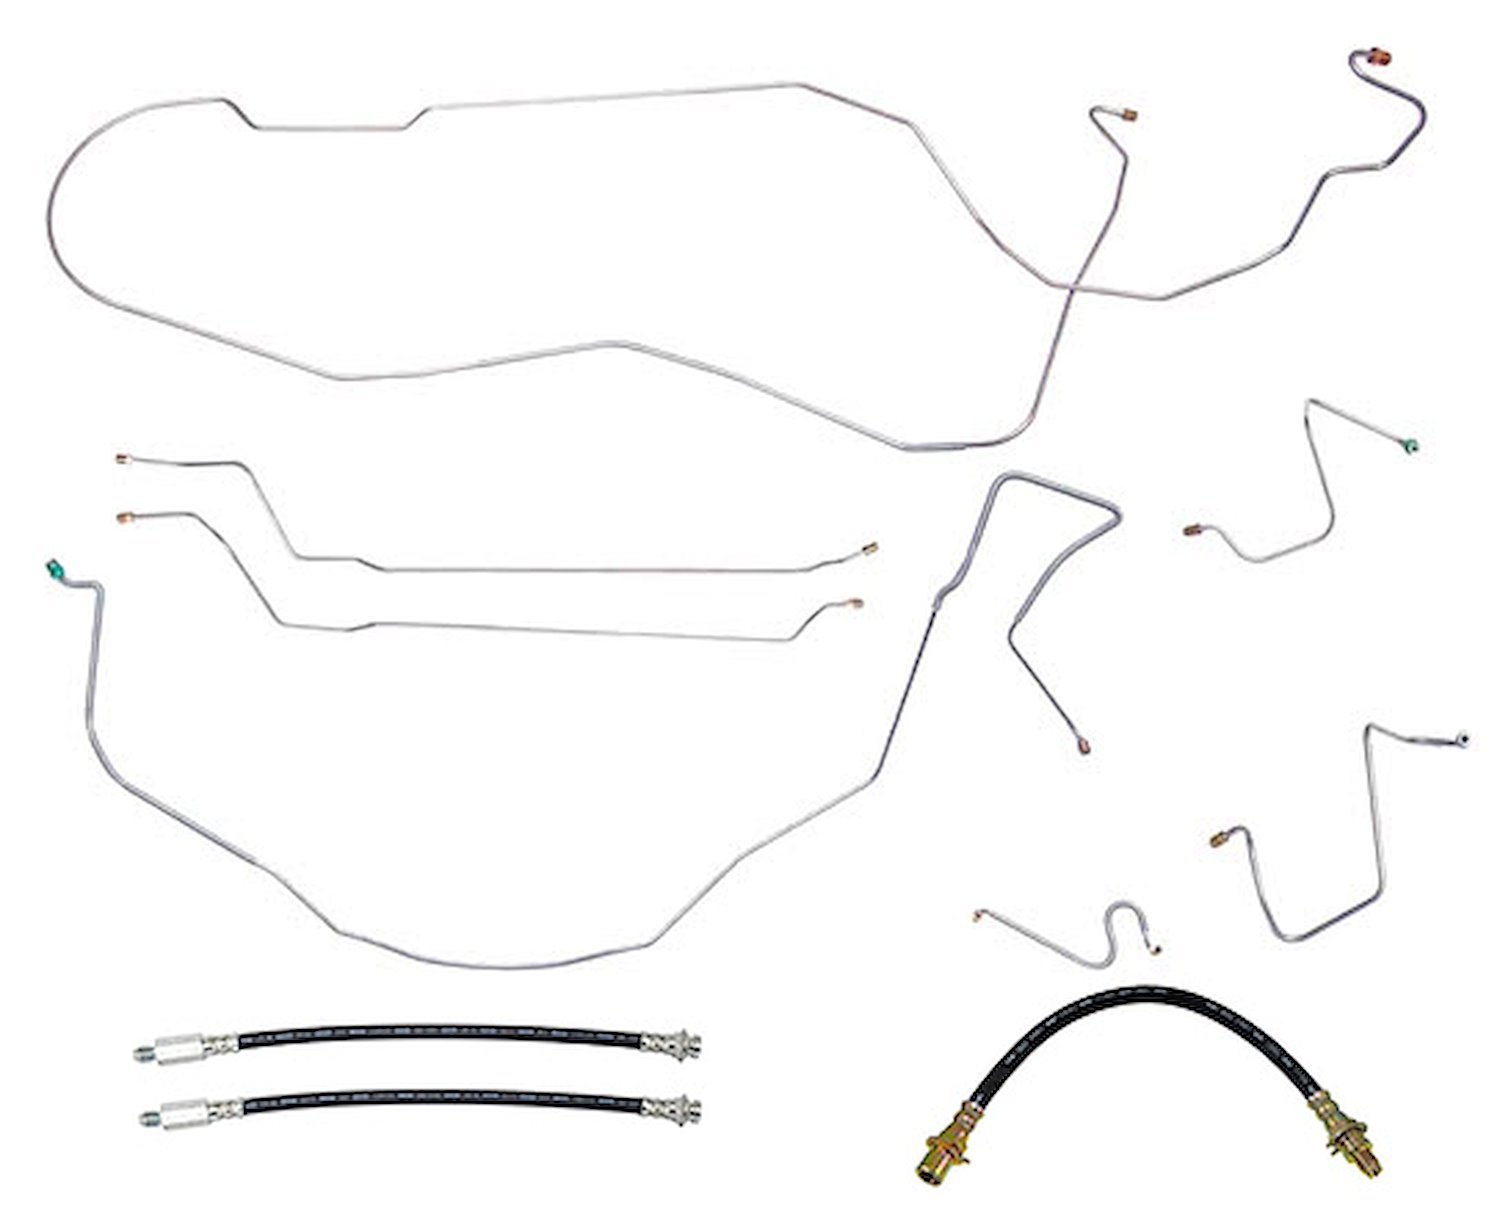 Complete Brake Line & Hose Kit for 1967 Chevy Chevelle, Malibu SS Hardtop w/Manual Drum Brakes [Stainless Steel]